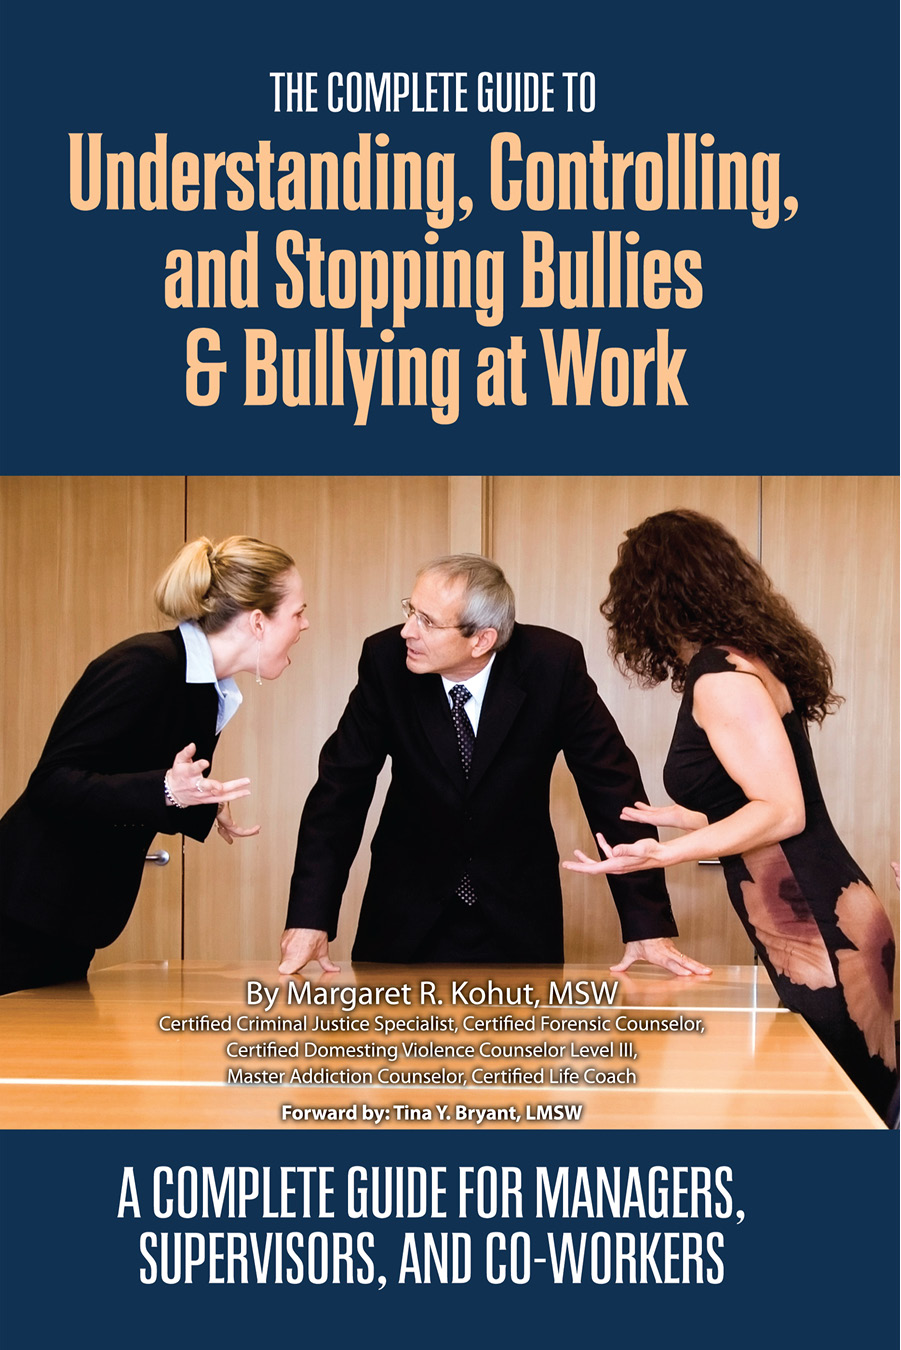 The Complete Guide to Understanding Controlling and Stopping Bullies - photo 1